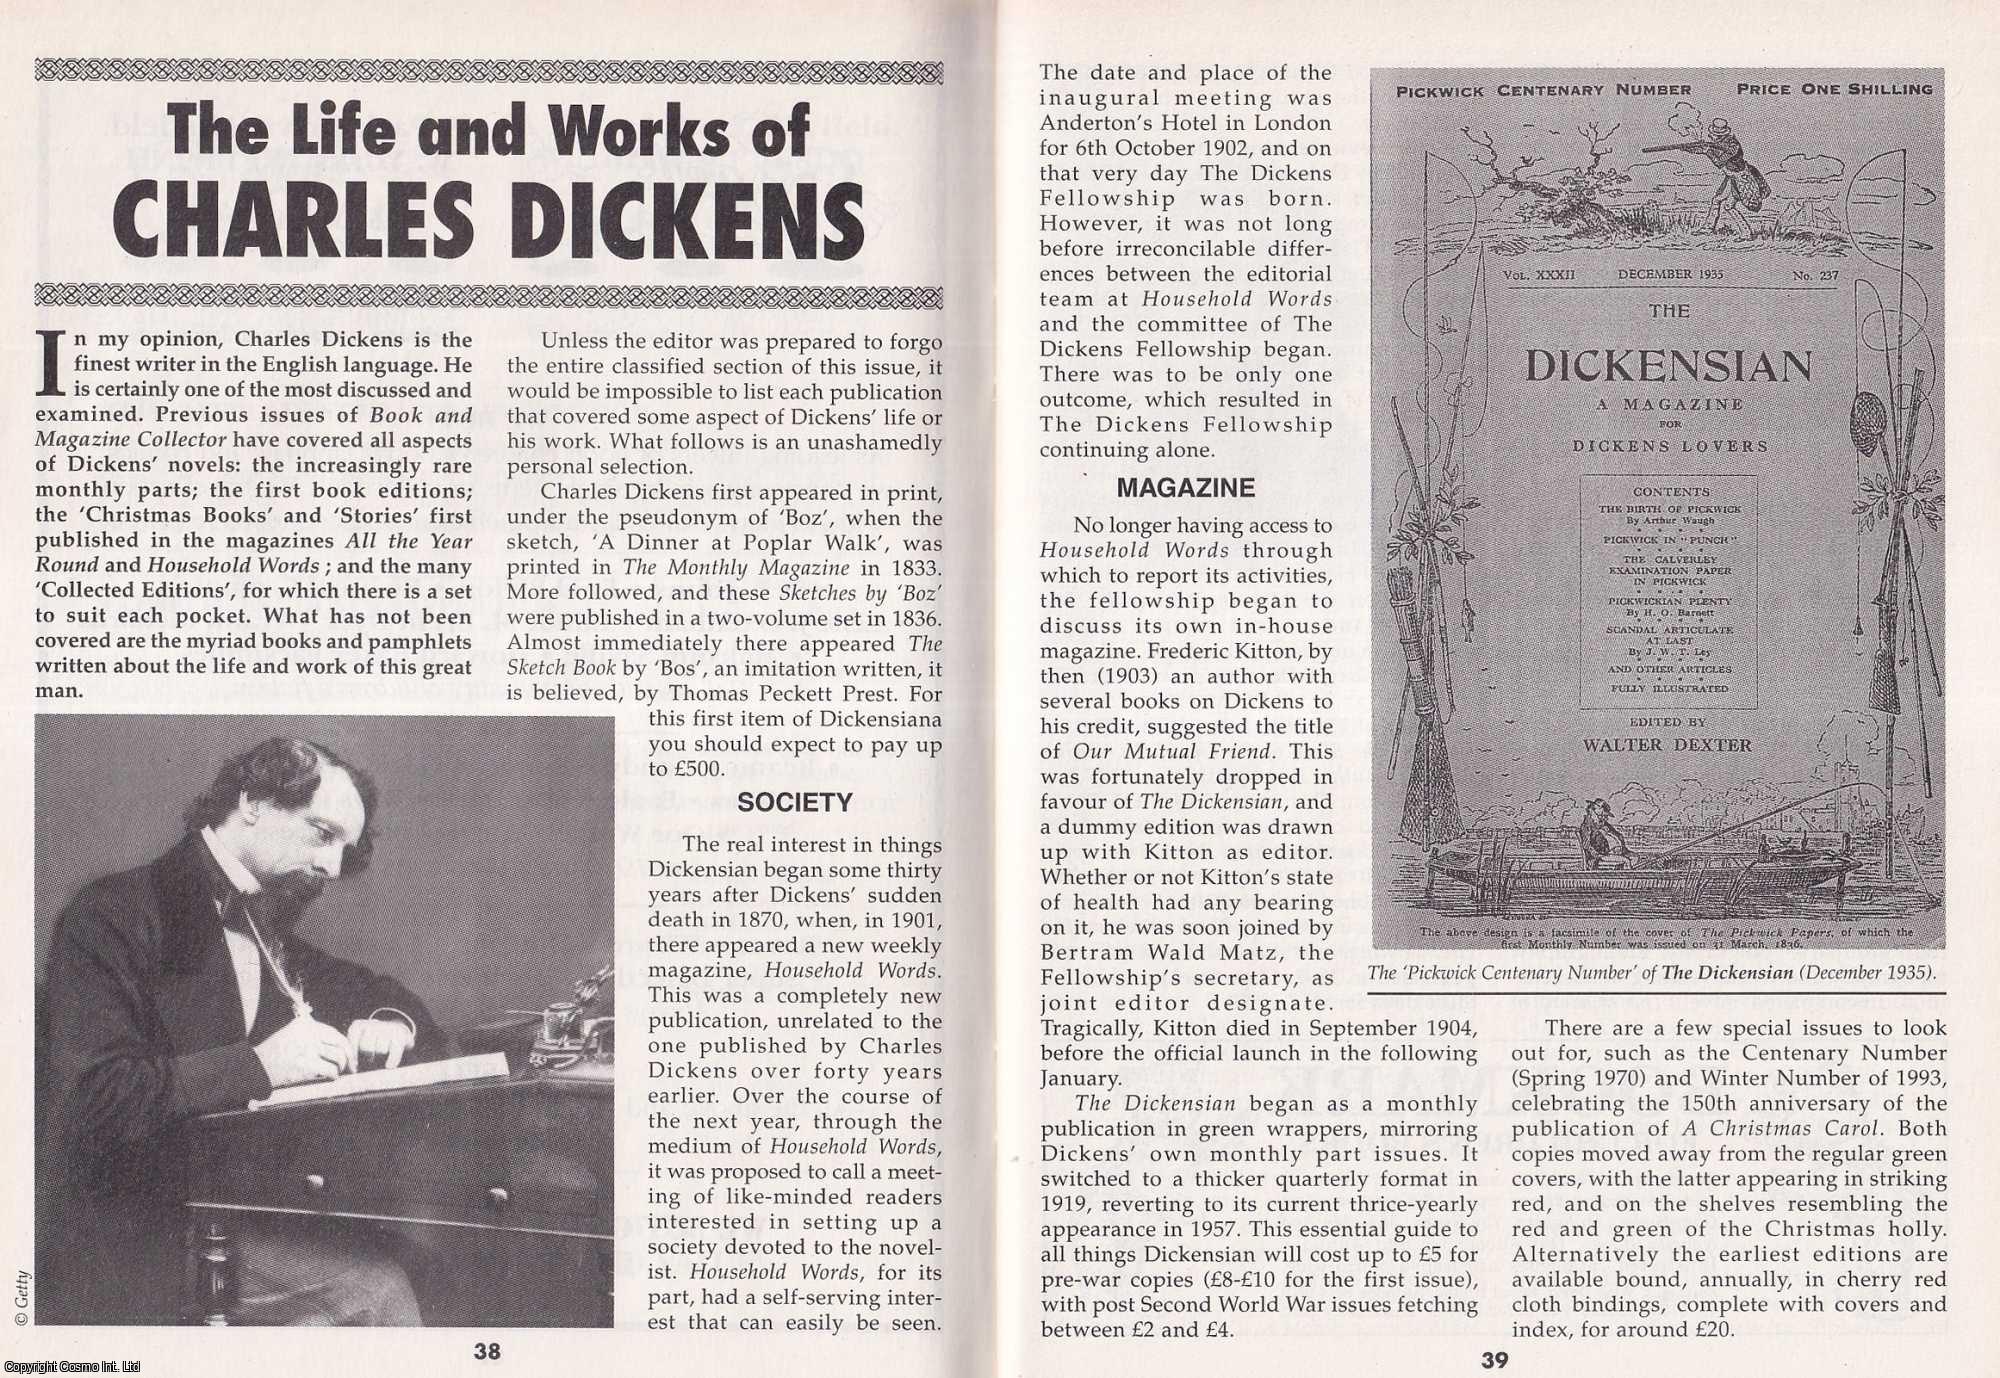 --- - The Life and Works of Charles Dickens. This is an original article separated from an issue of The Book & Magazine Collector publication.